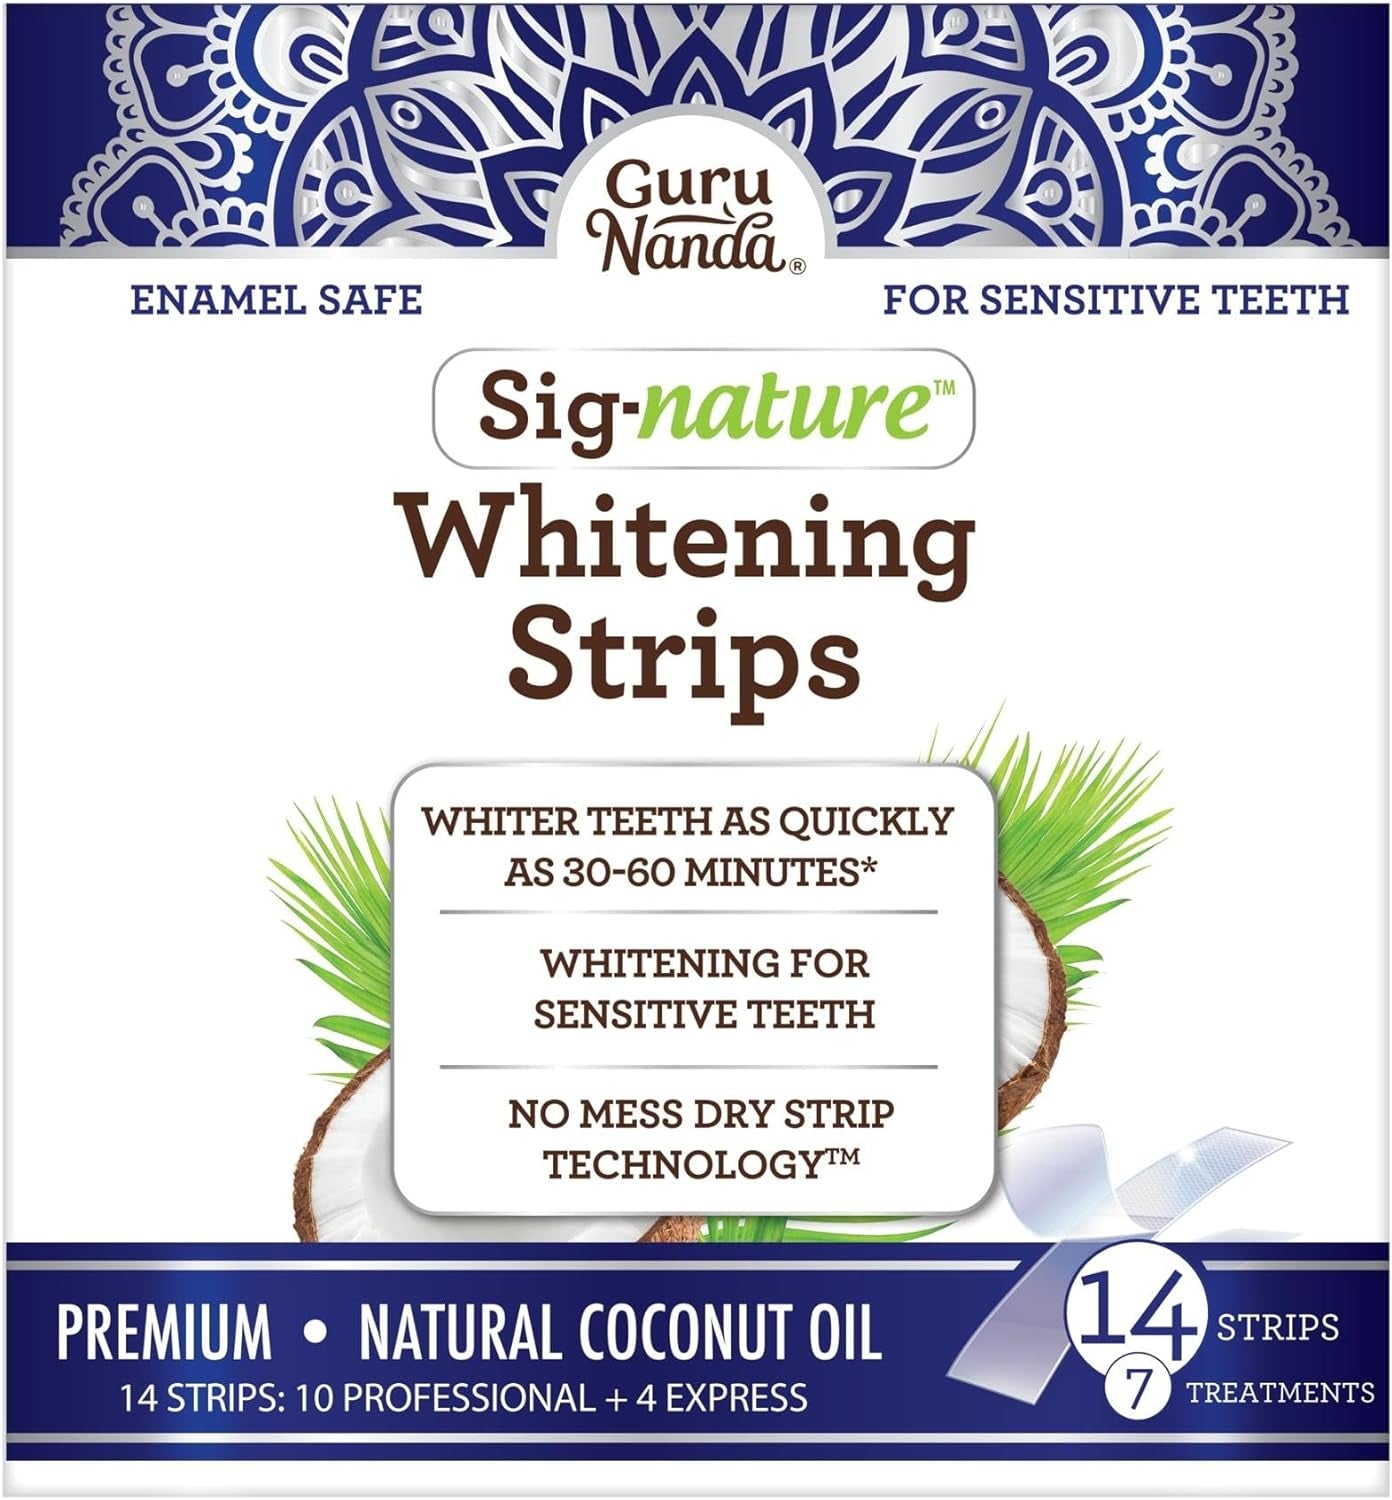 Oral Kit Containing- Coconut & Peppermint Oil Pulling, Teeth Whitening Strips- 7 Treatments with 14 Strips & Concentrated Mouthwash(2 Fl Oz)